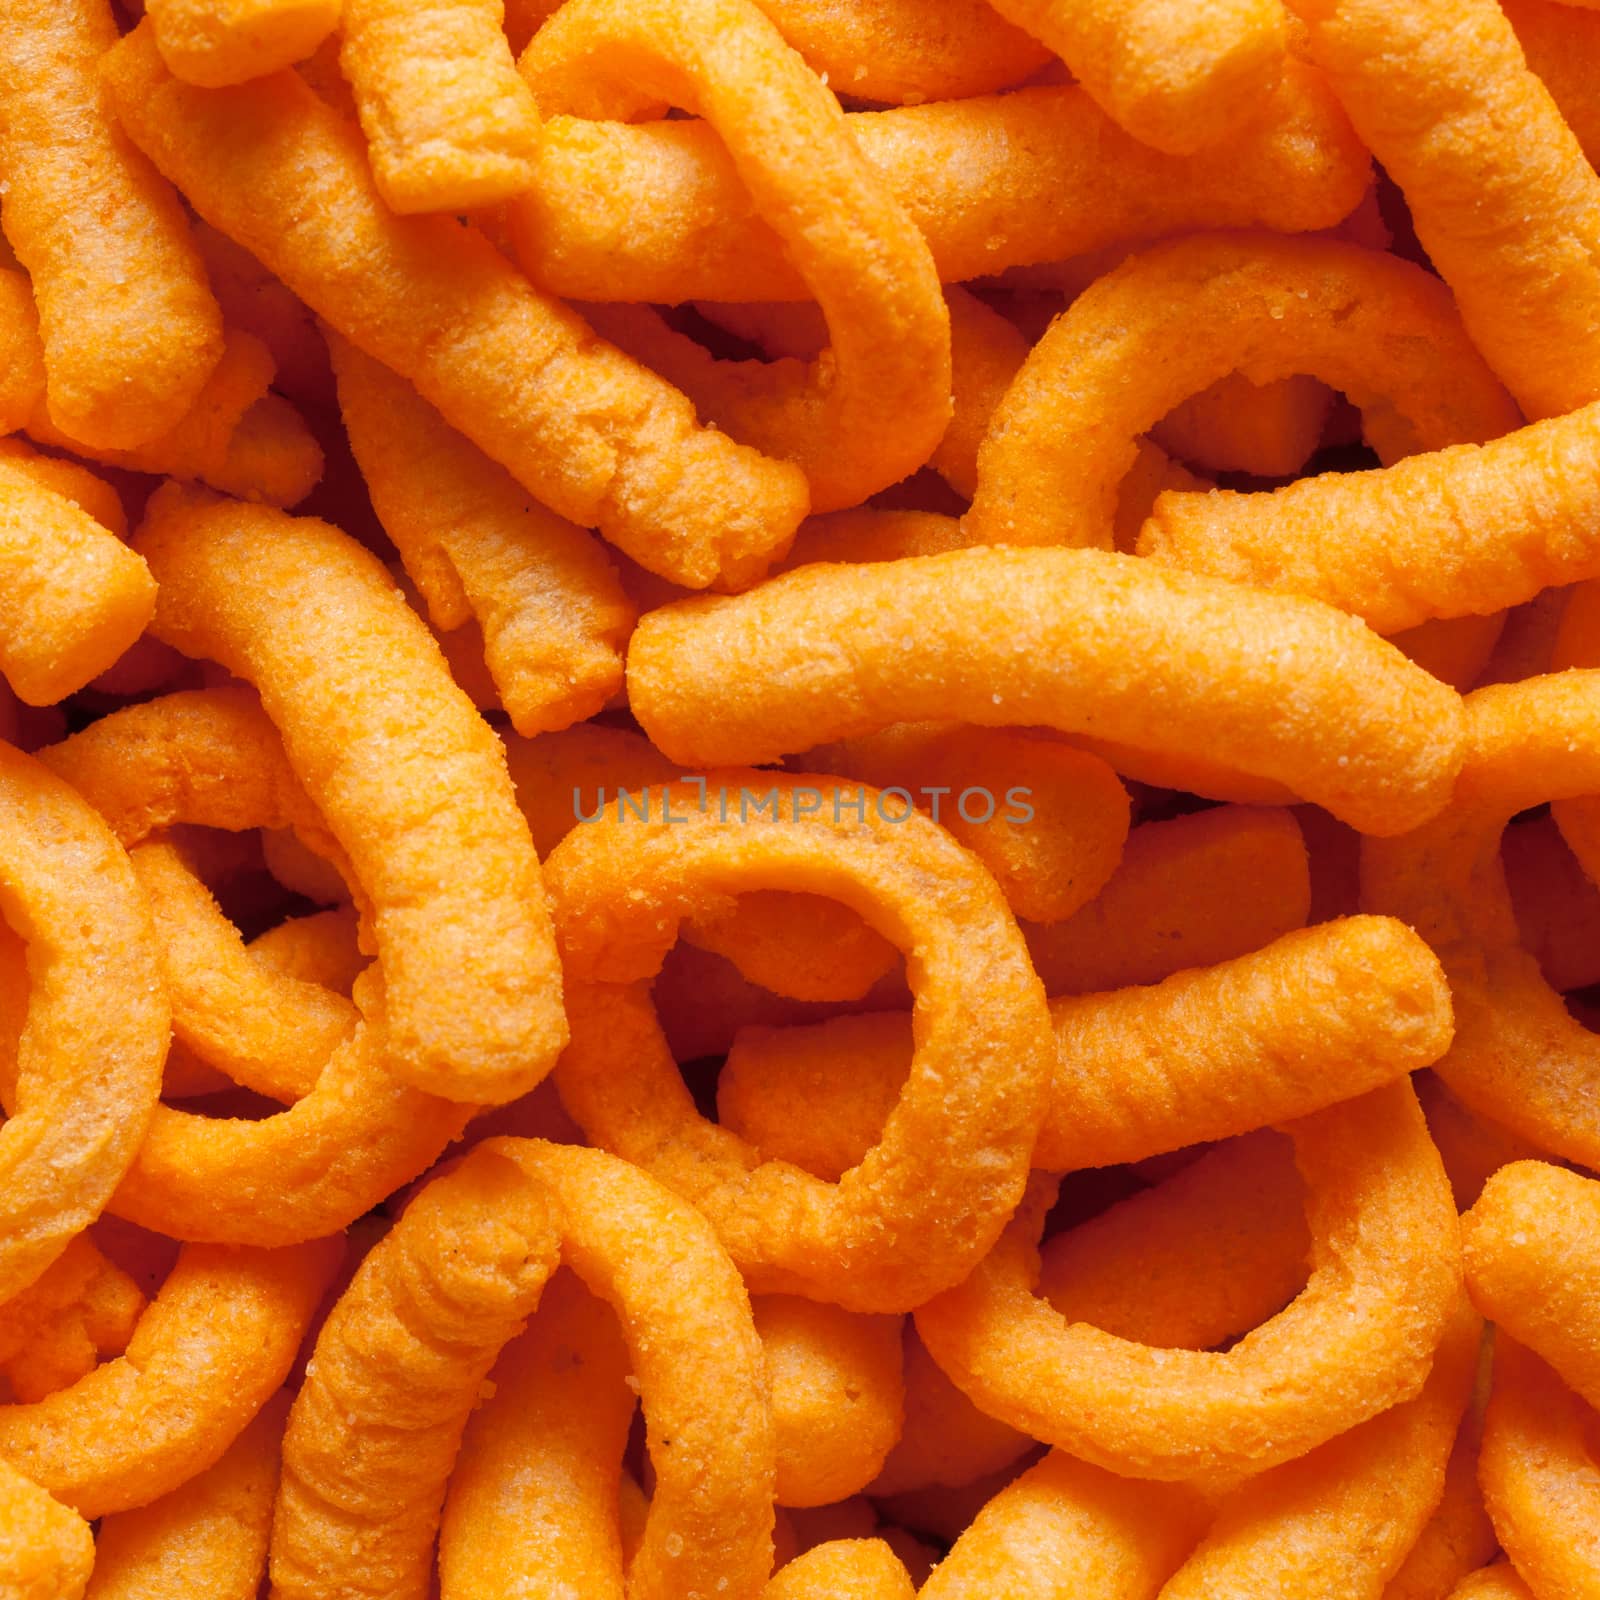 Closeup of cheese puffs. Fills the frame